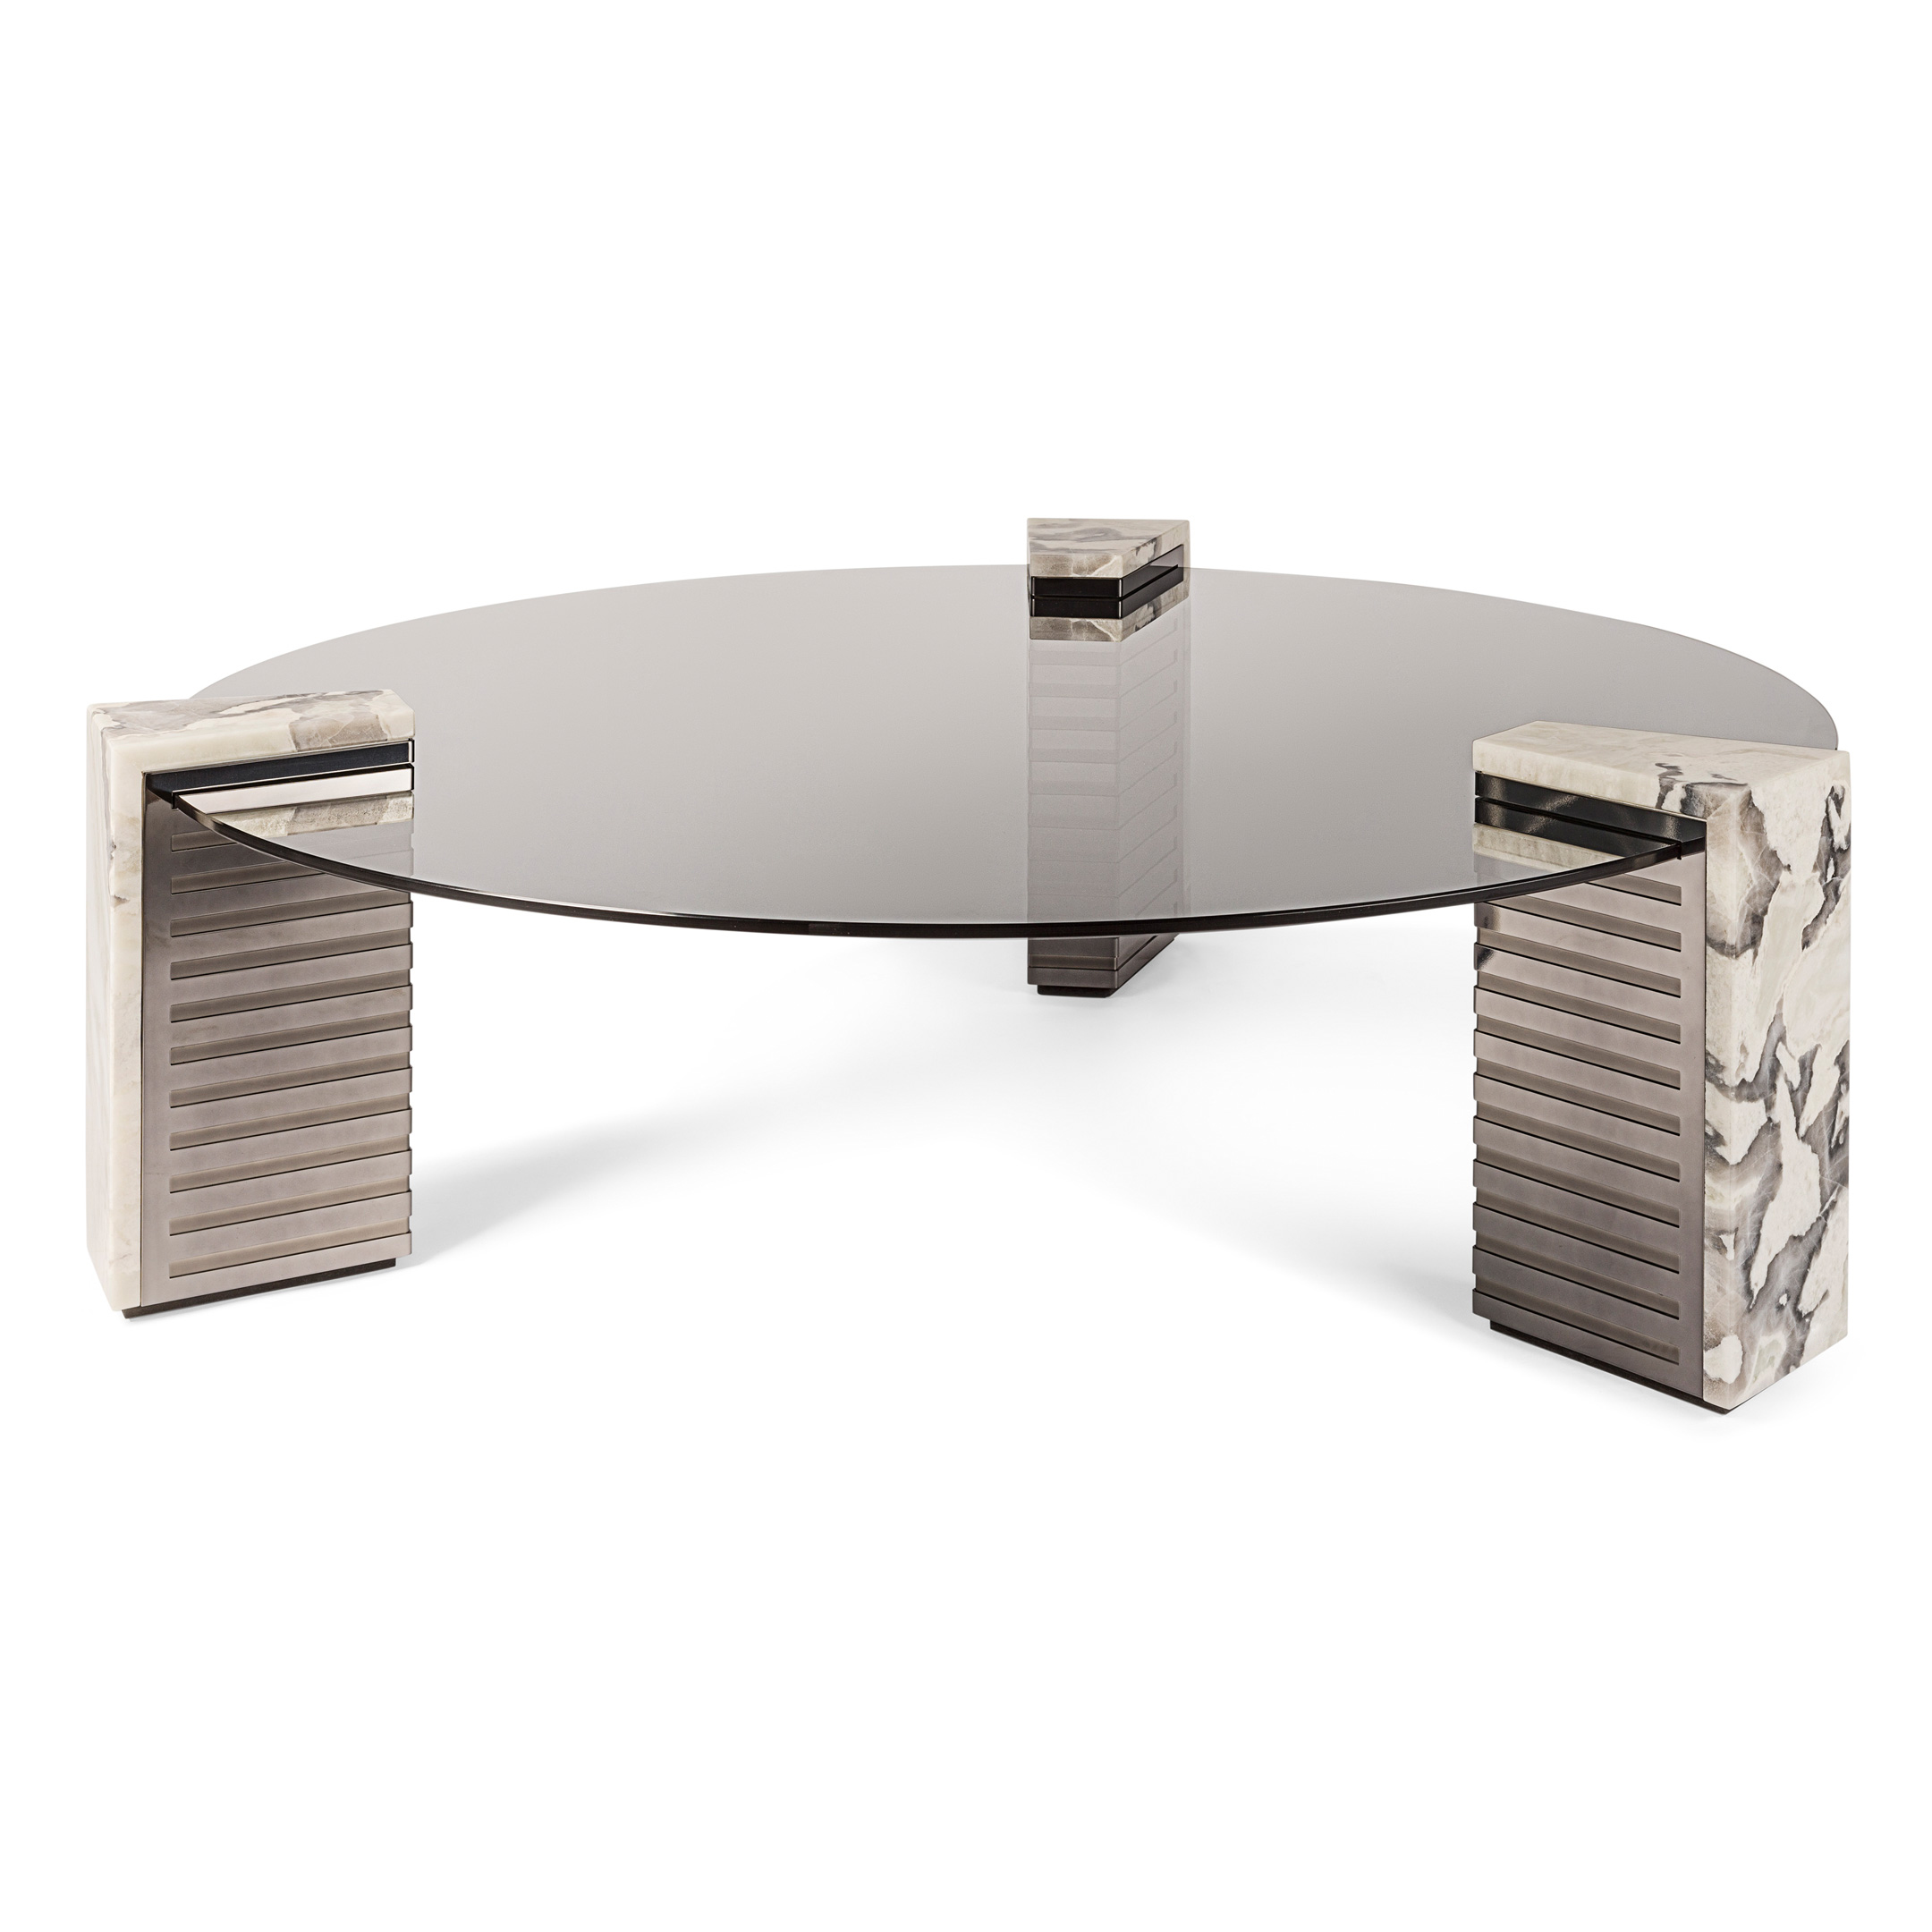 Visionnaire Admto Table